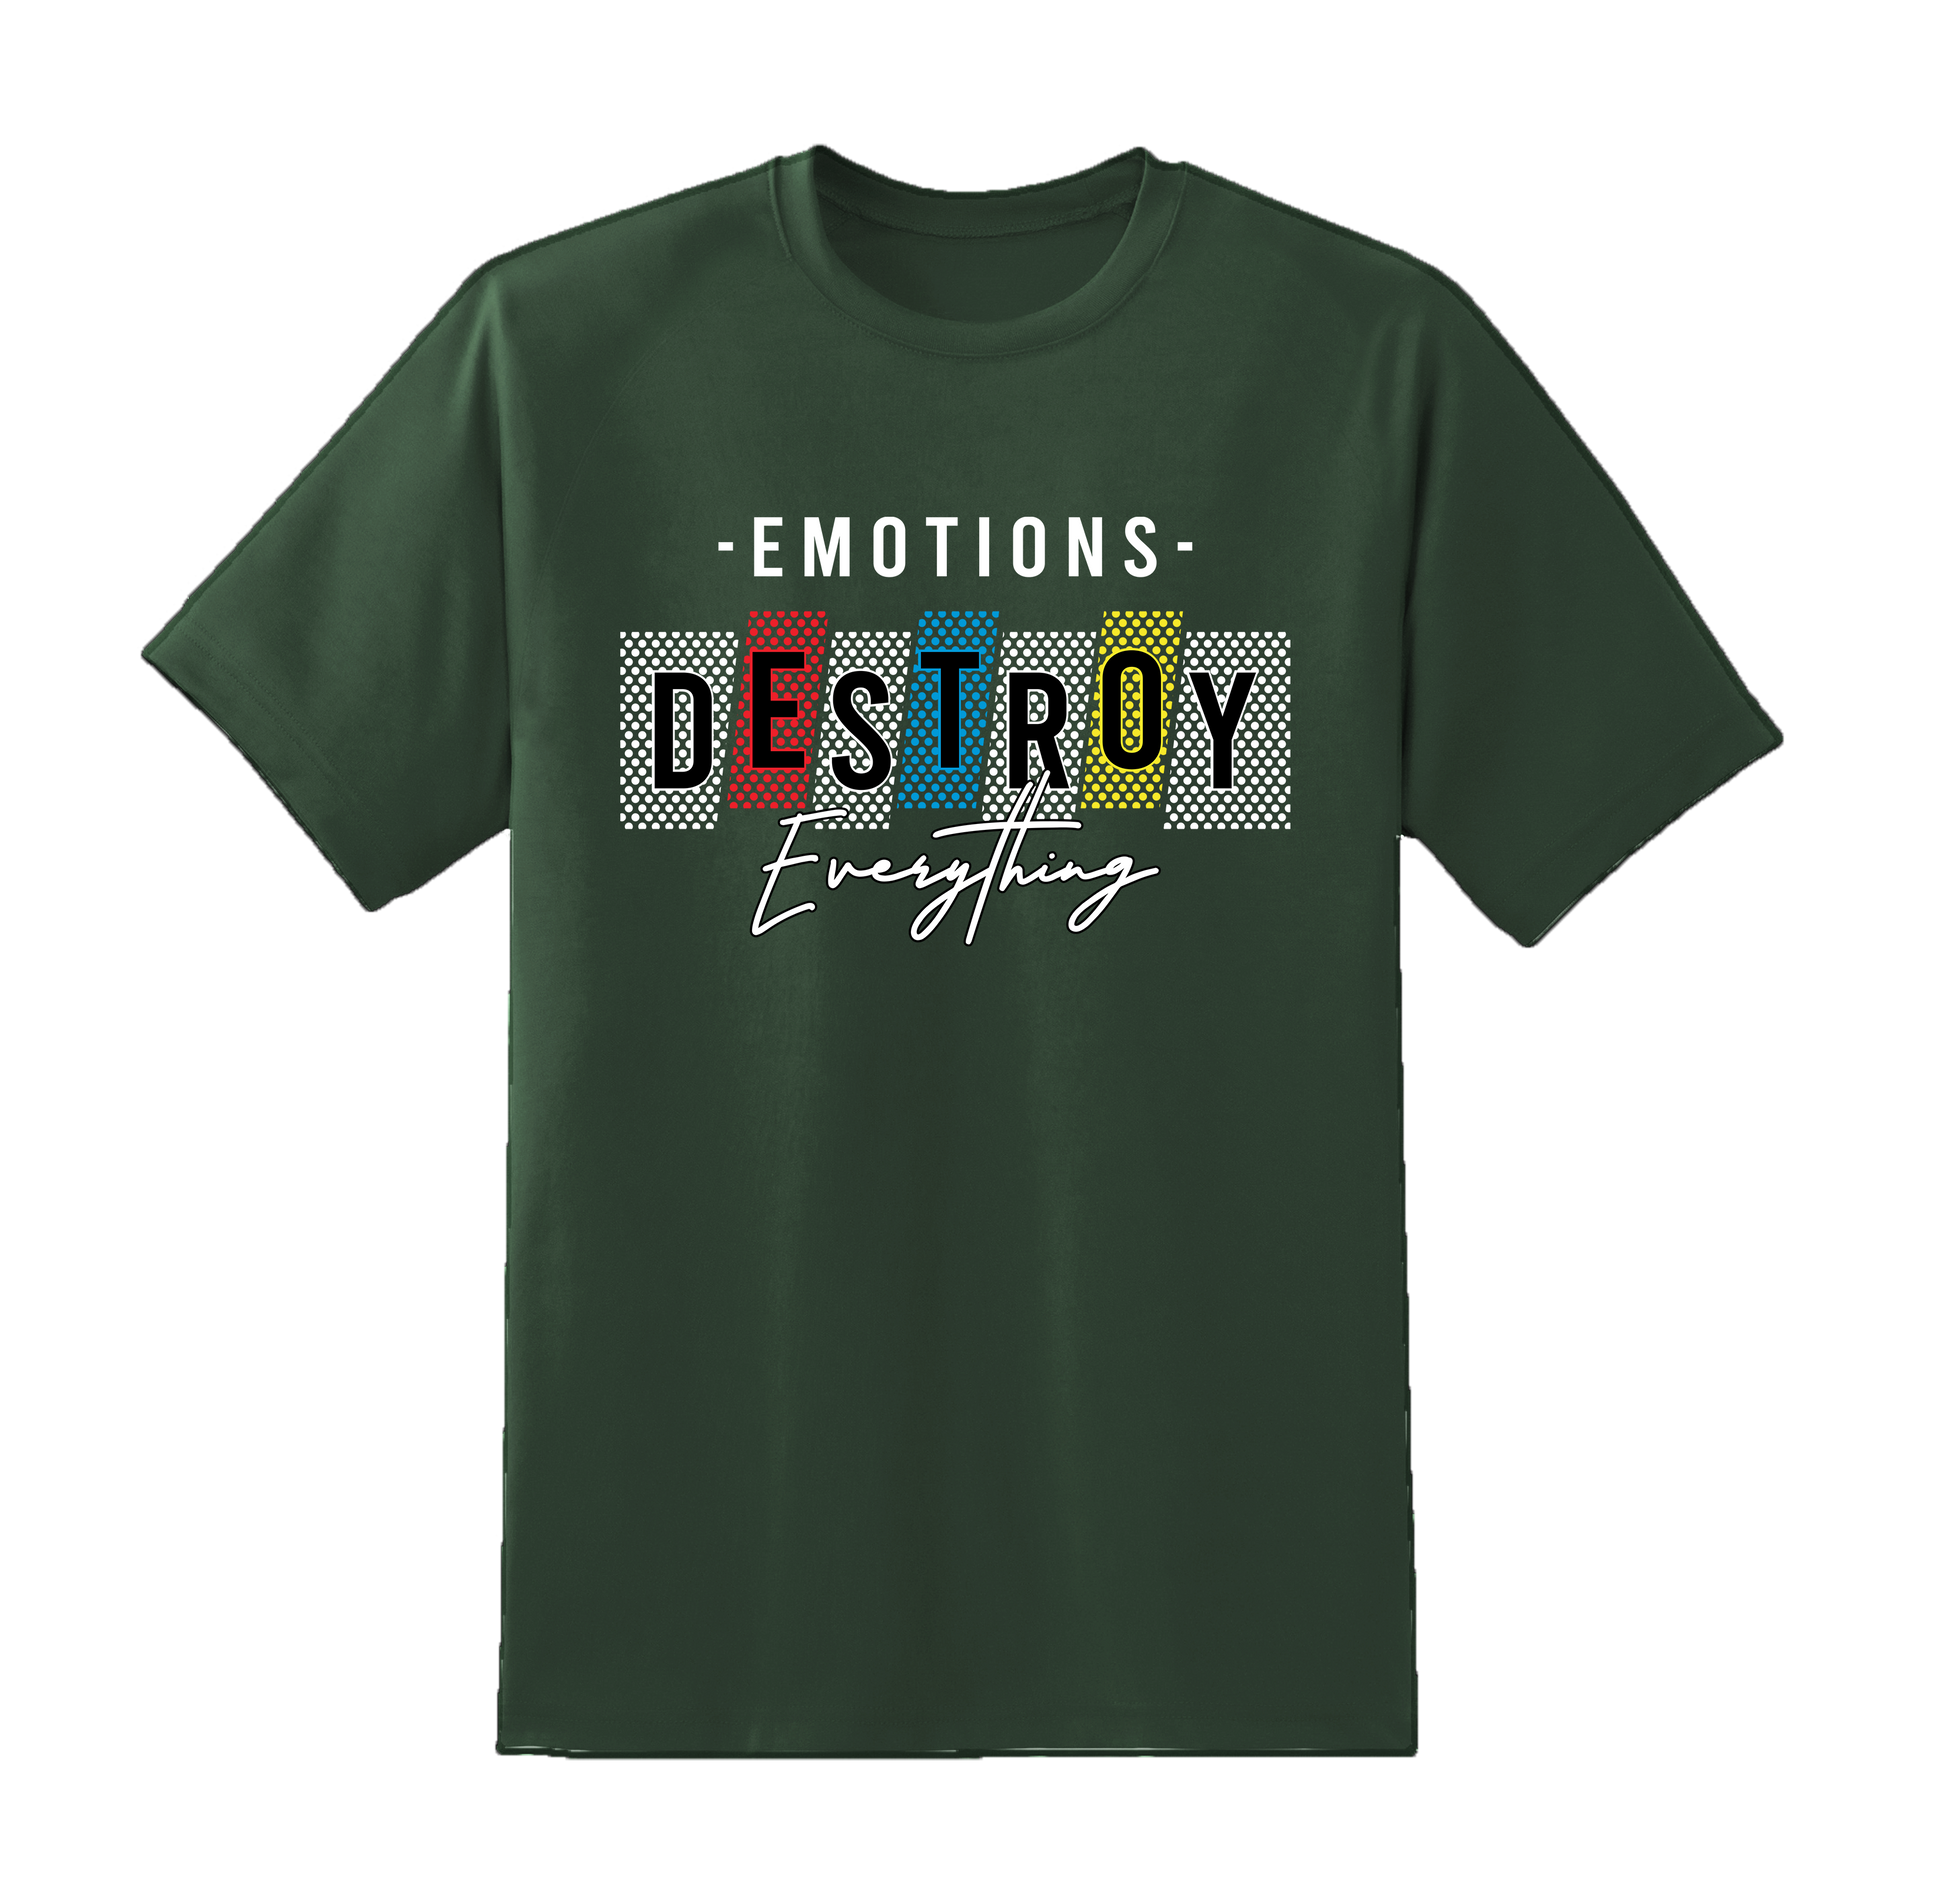 "Emotions Destroy Everything" Tee